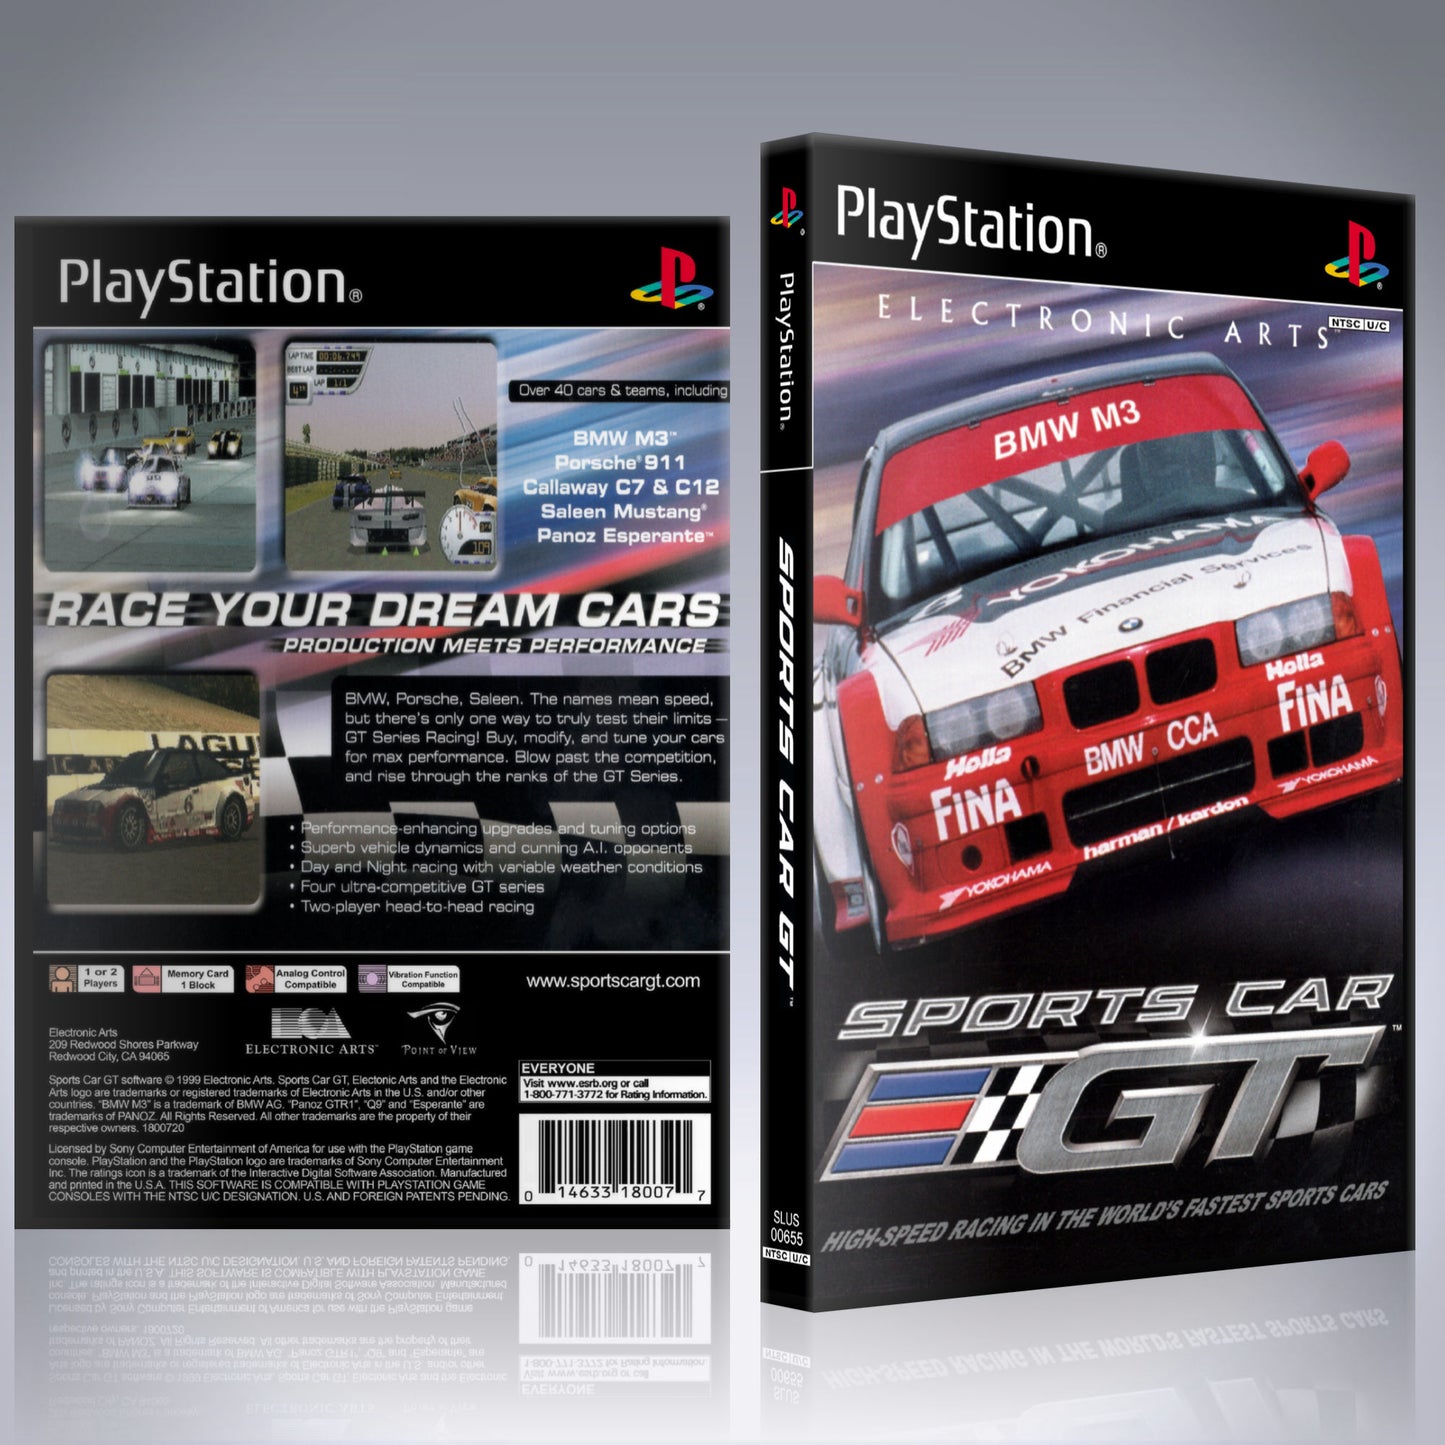 PS1 Case - NO GAME - Sports Car GT